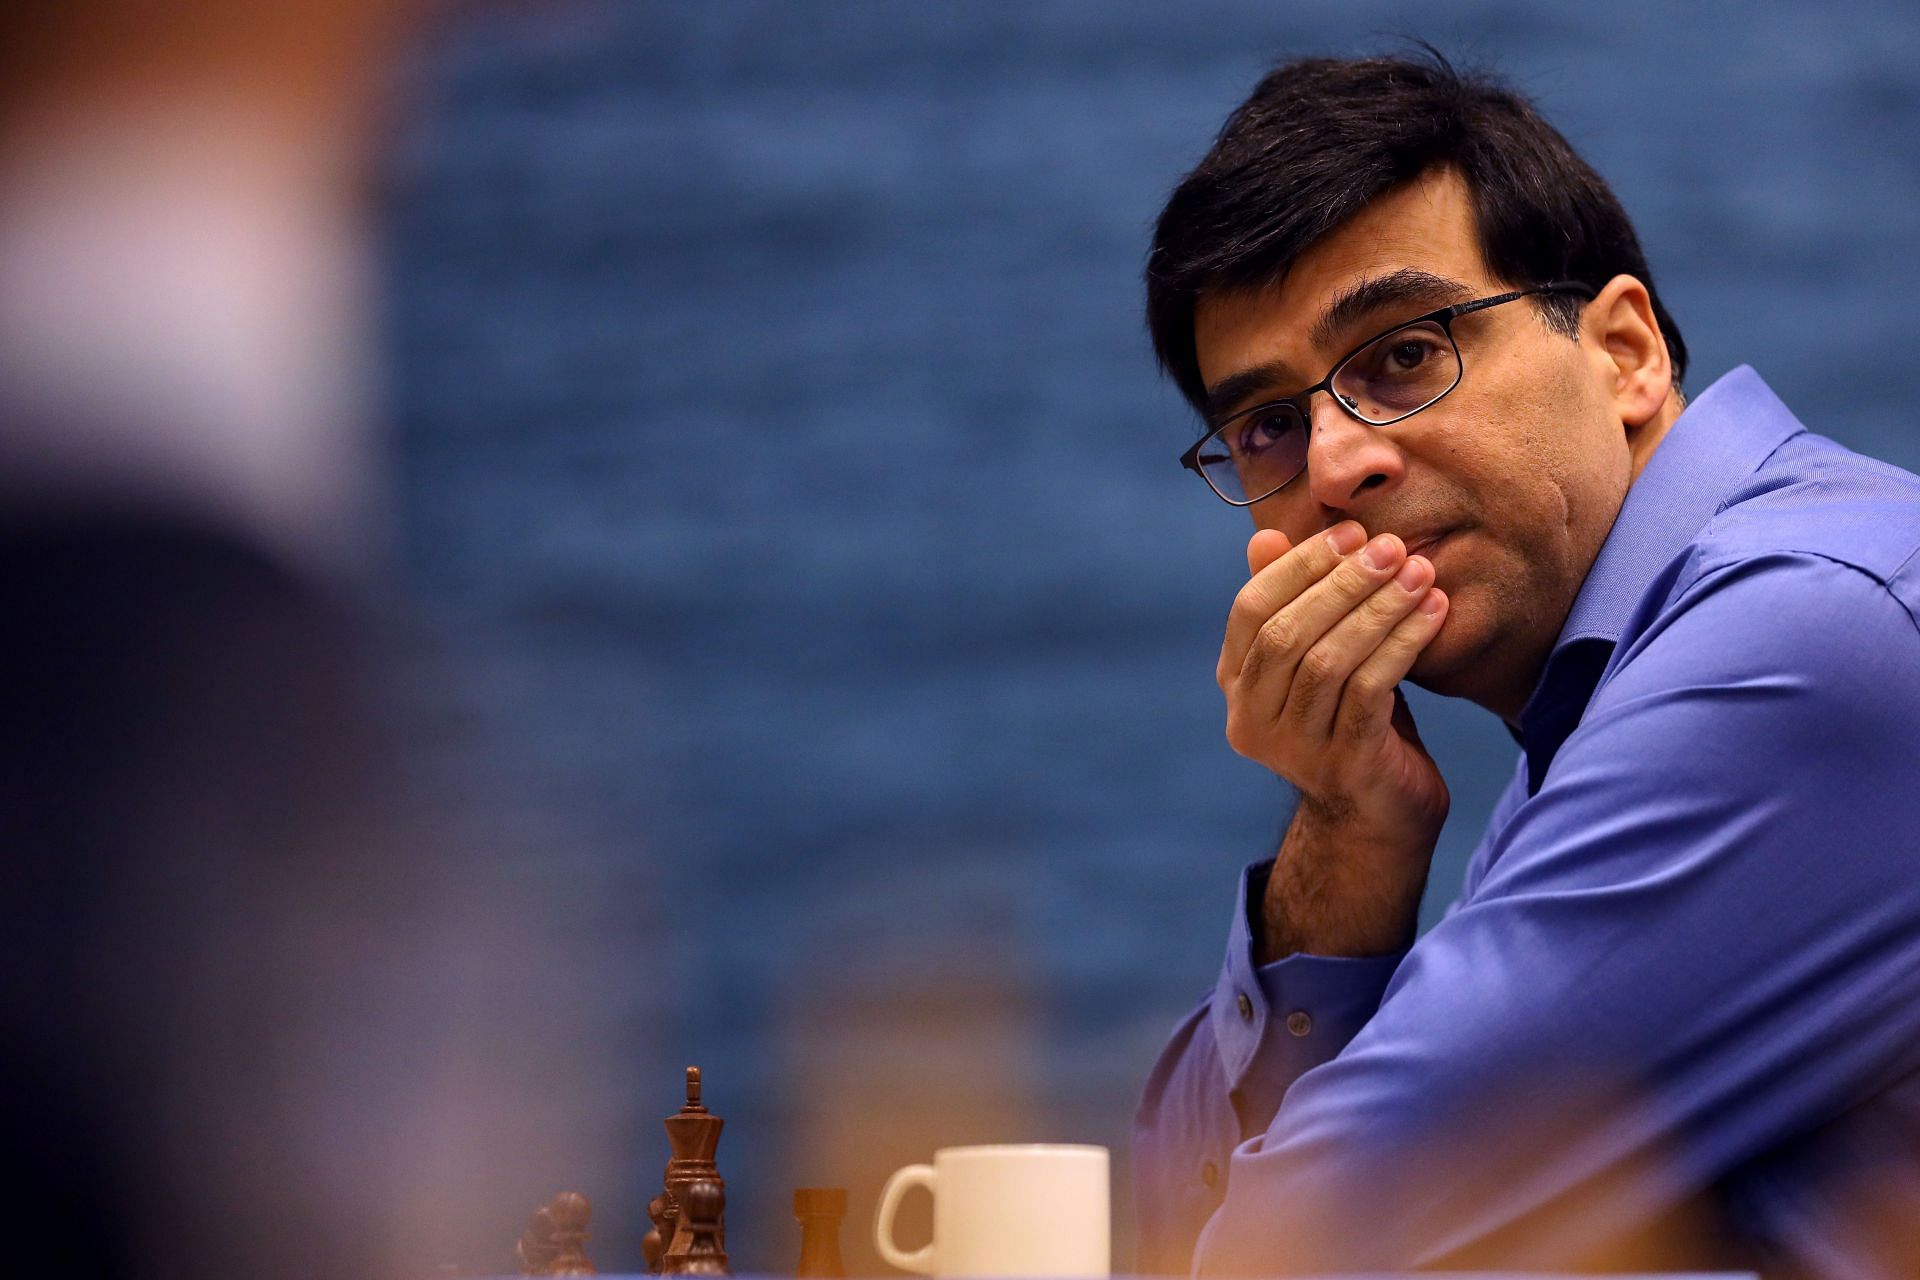 D Gukesh Replaces Viswanathan Anand As India's Top Ranked Chess Player